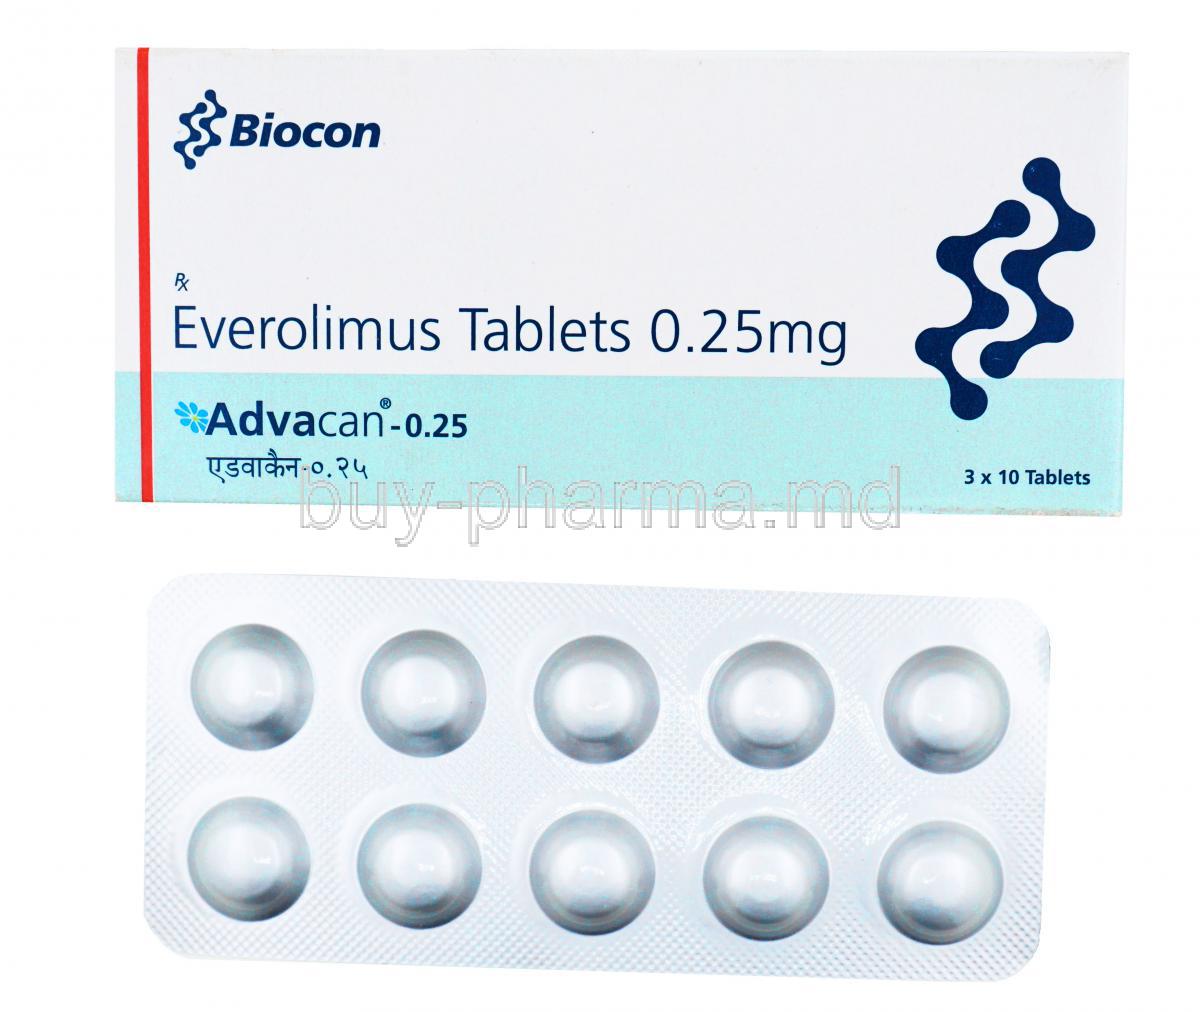 Advacan, Everolimus, 0.25mg, 3x10 tablets, Biocon, Box front presentation with blister pack